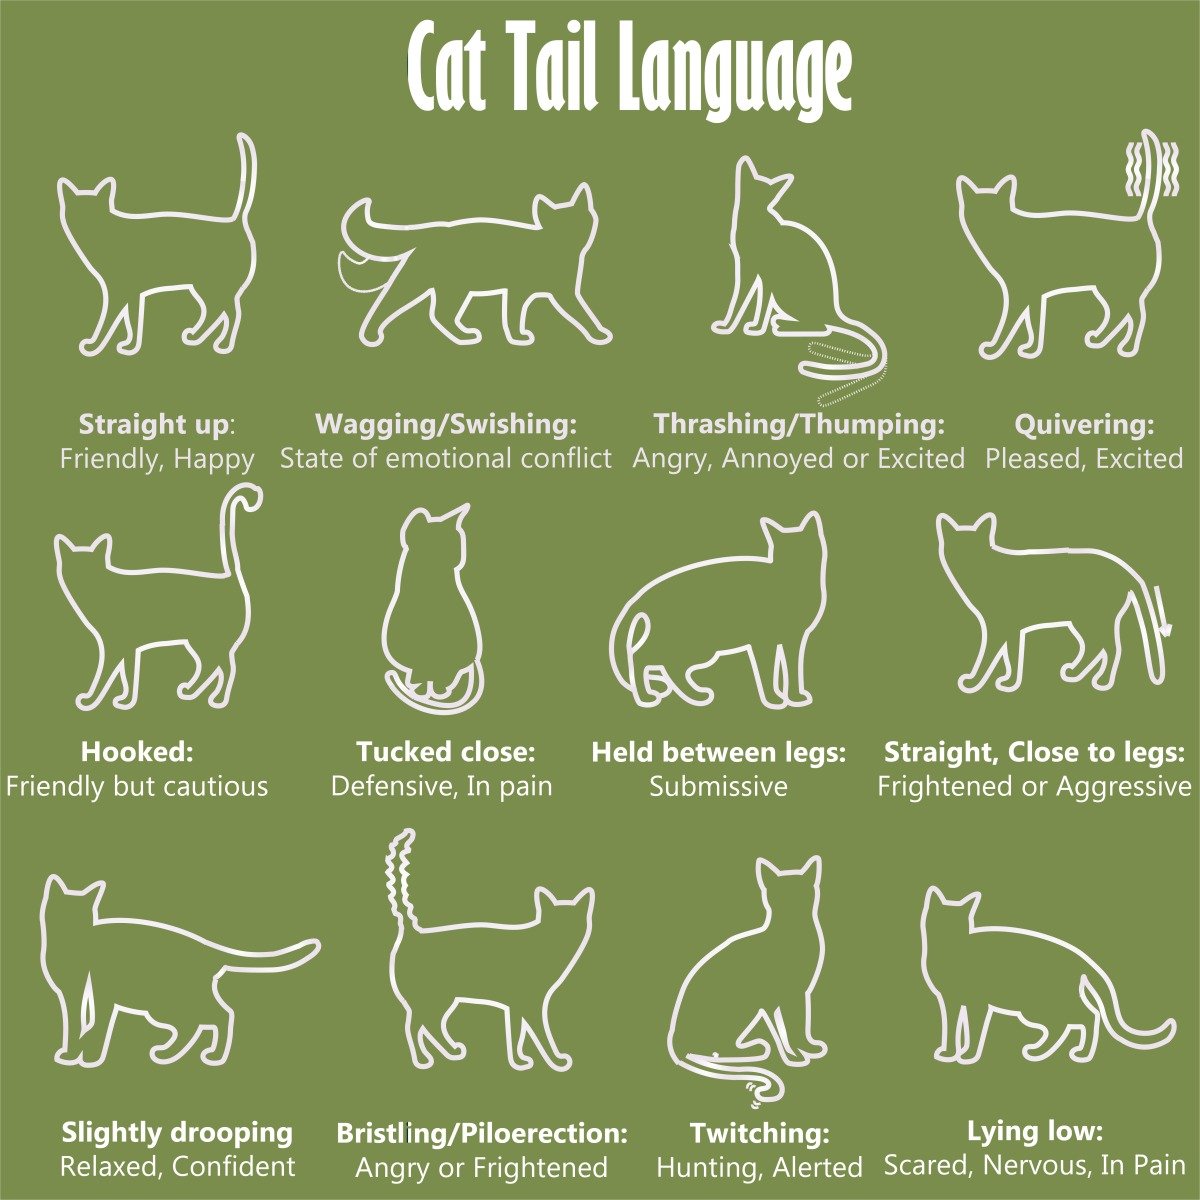 Other Forms of Cat Communication